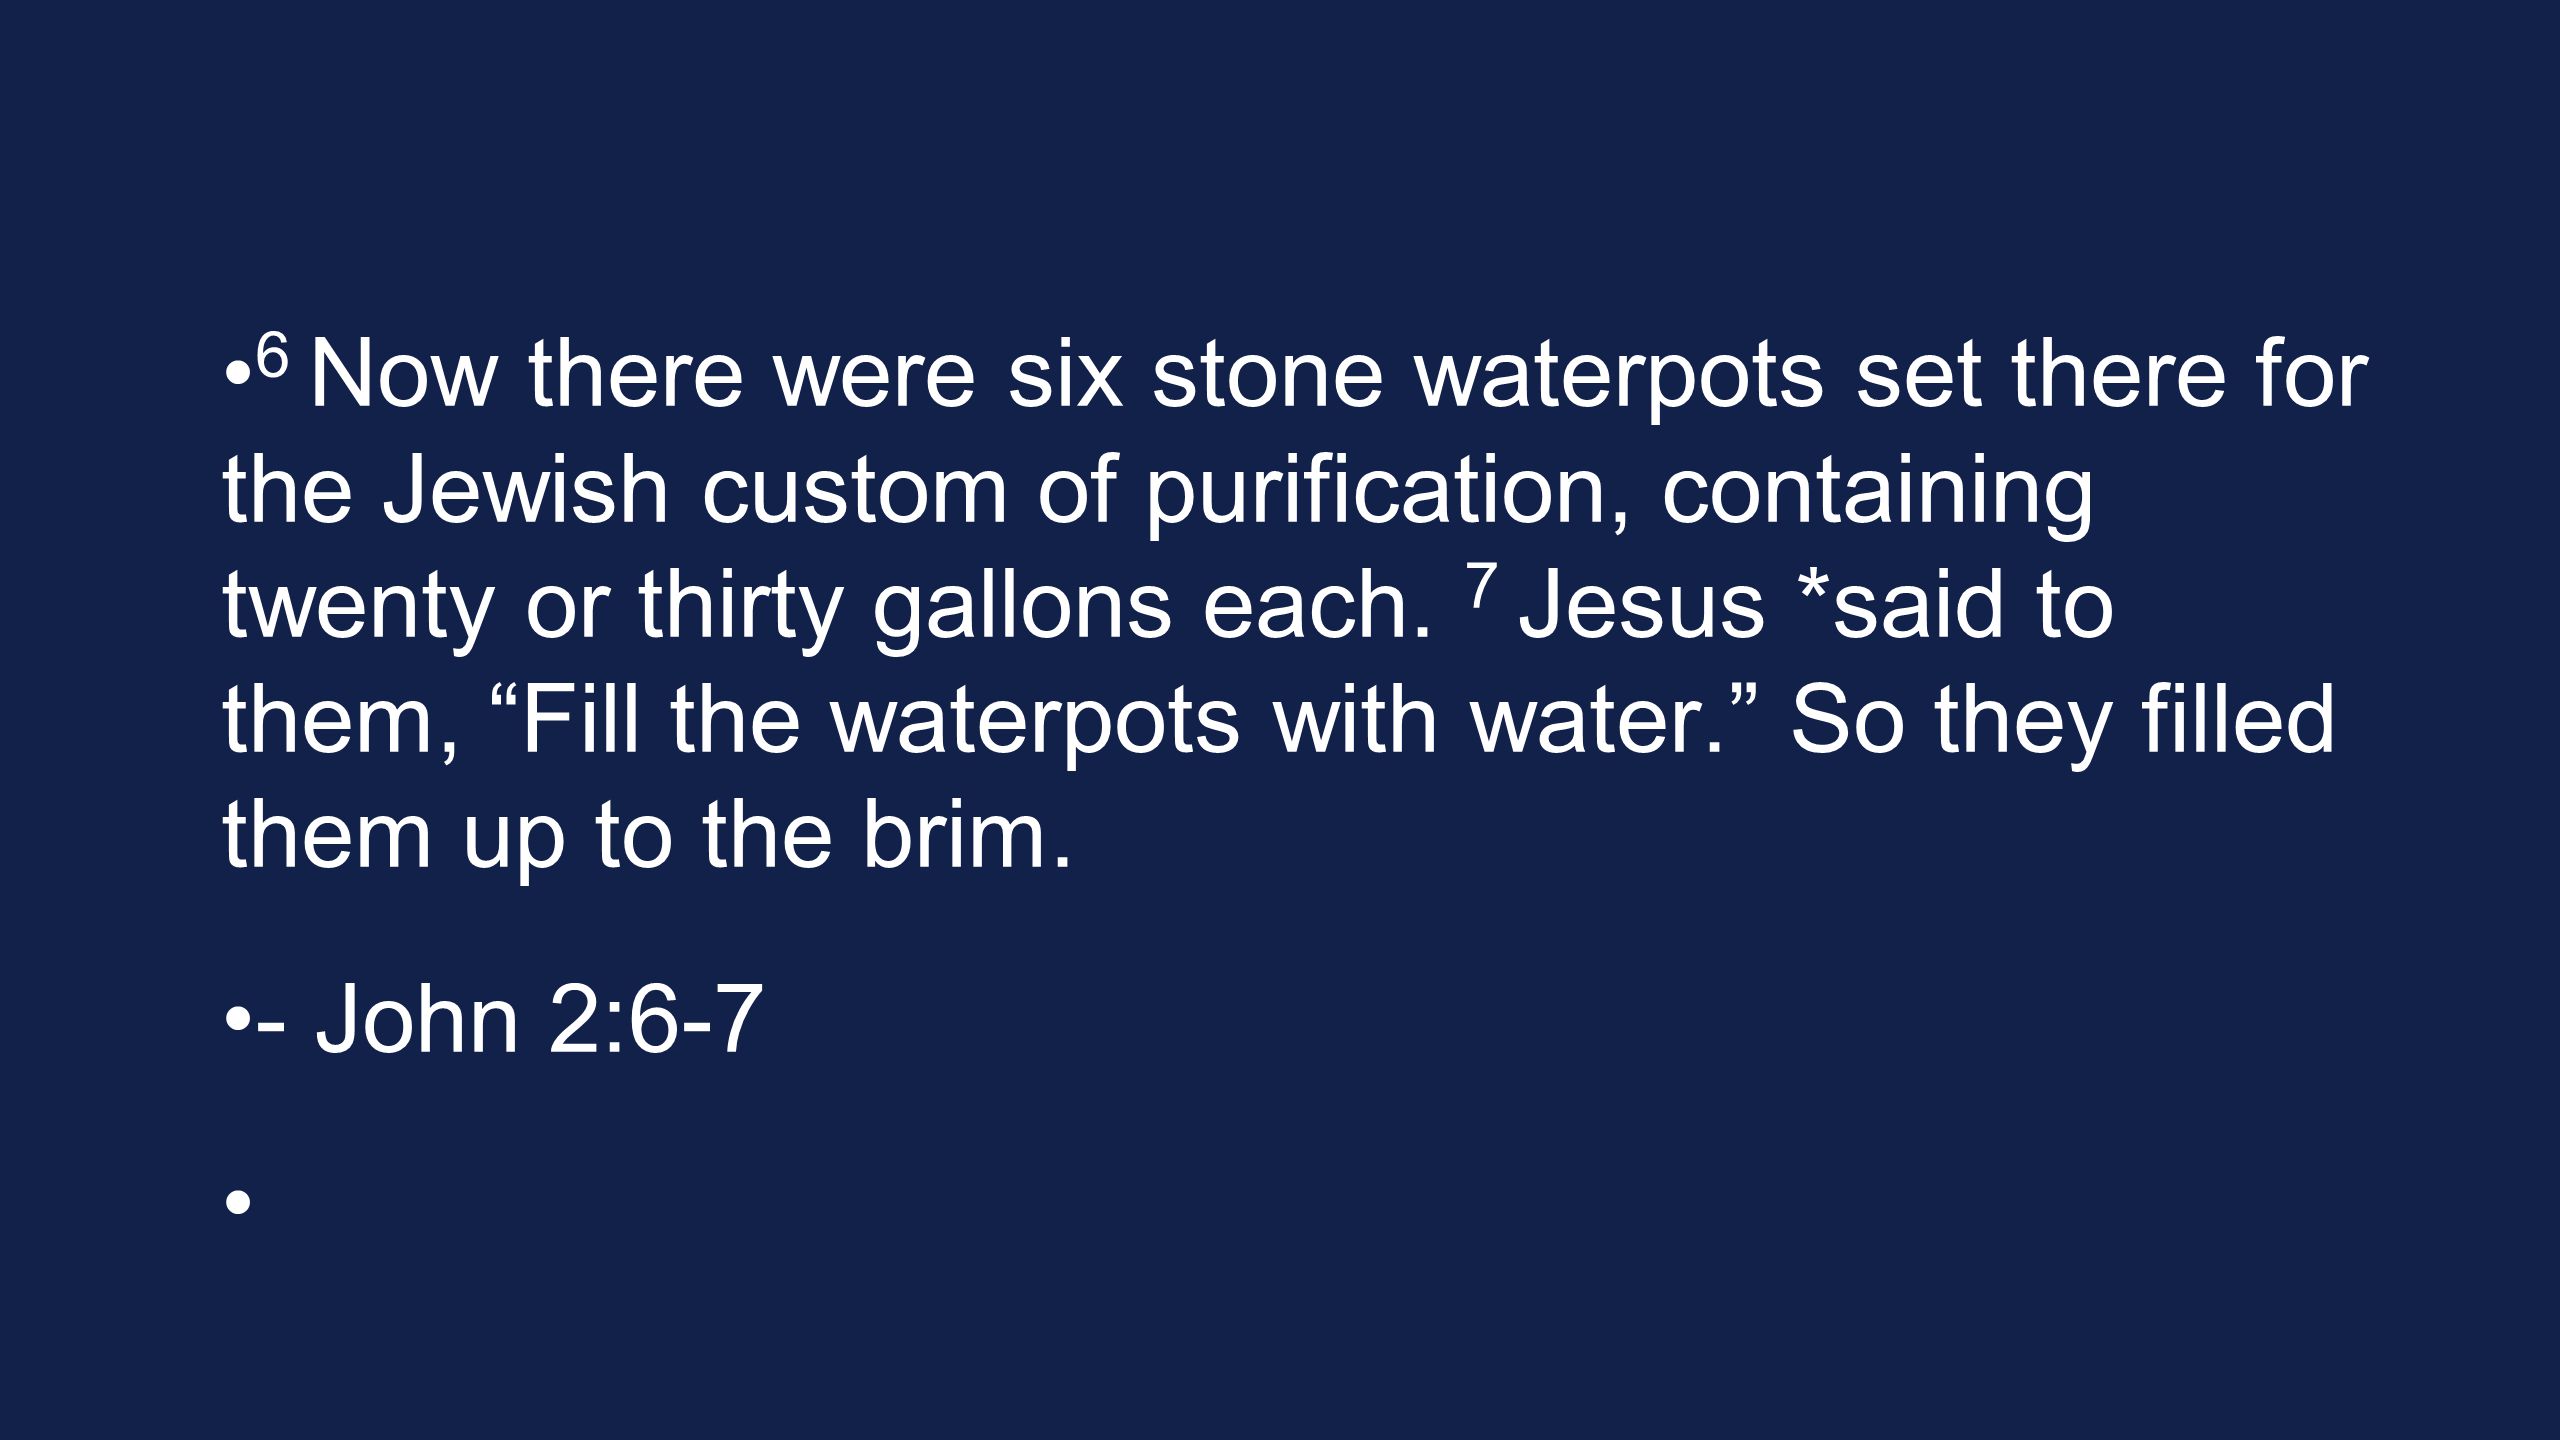 6 Now there were six stone waterpots set there for the Jewish custom of purification, containing twenty or thirty gallons each.